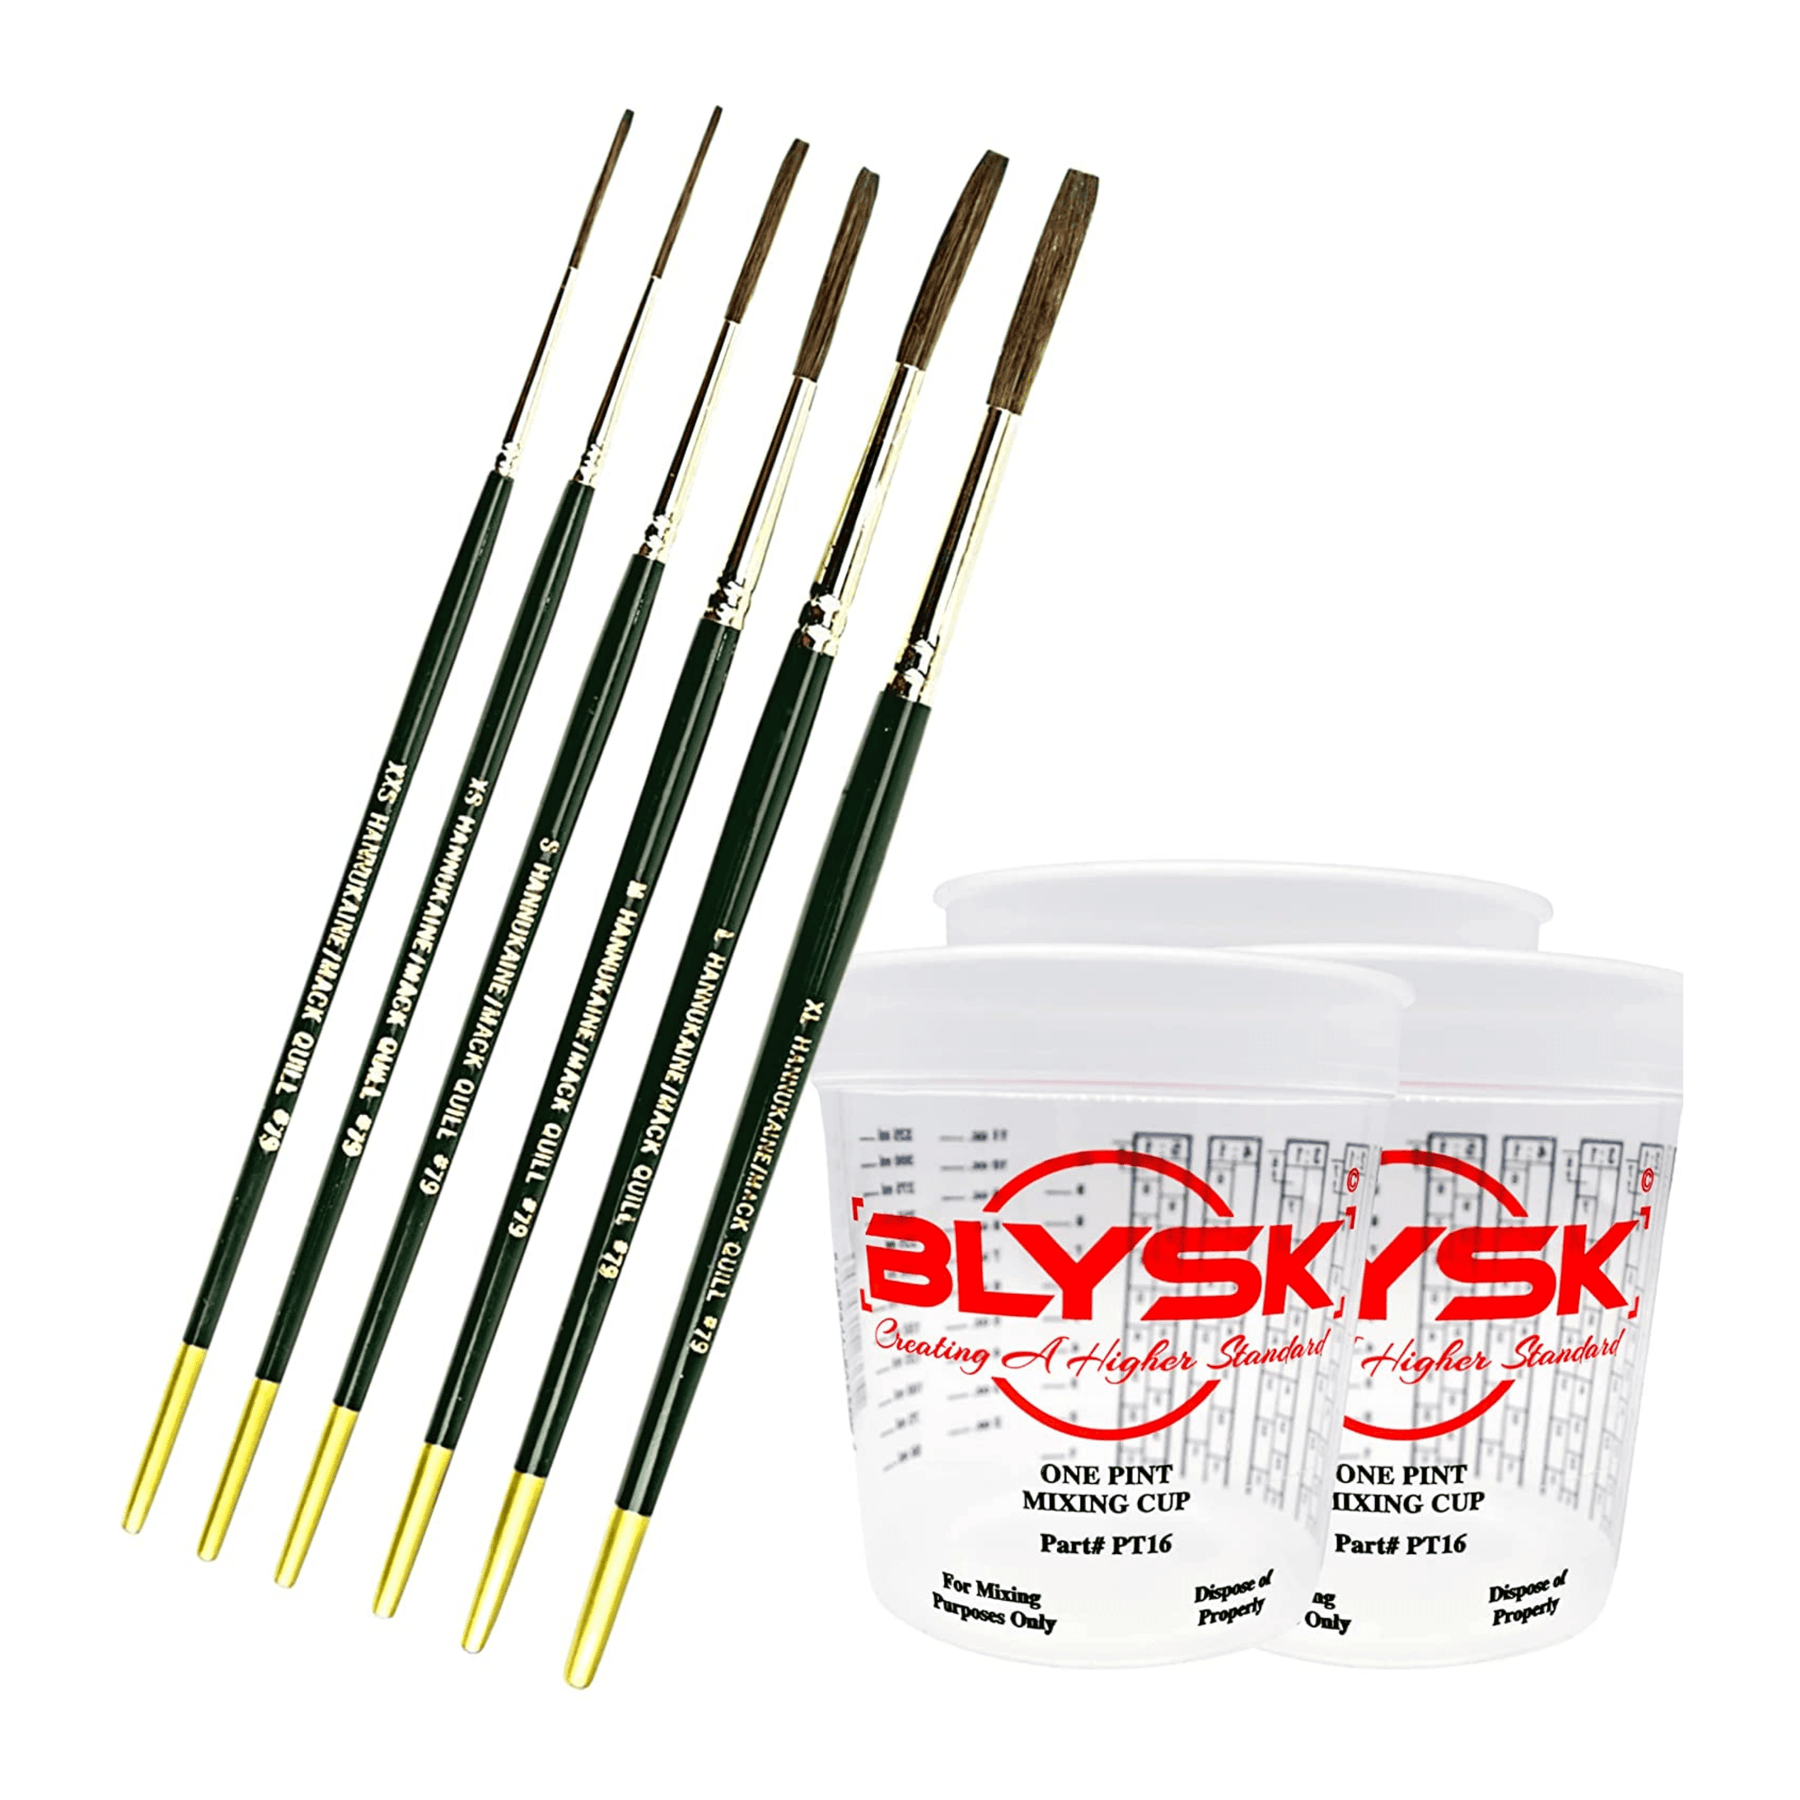 BLYSK and Mack The John Hannukaine Quill (79) Bundle with Free Pint Mixing Cups, pinstriping, Squirrel Hair, Taklon Hair, Sign, Lettering, Professional Art Supplies (6, XXS, XS, S, M, L, XL) - Maazzo